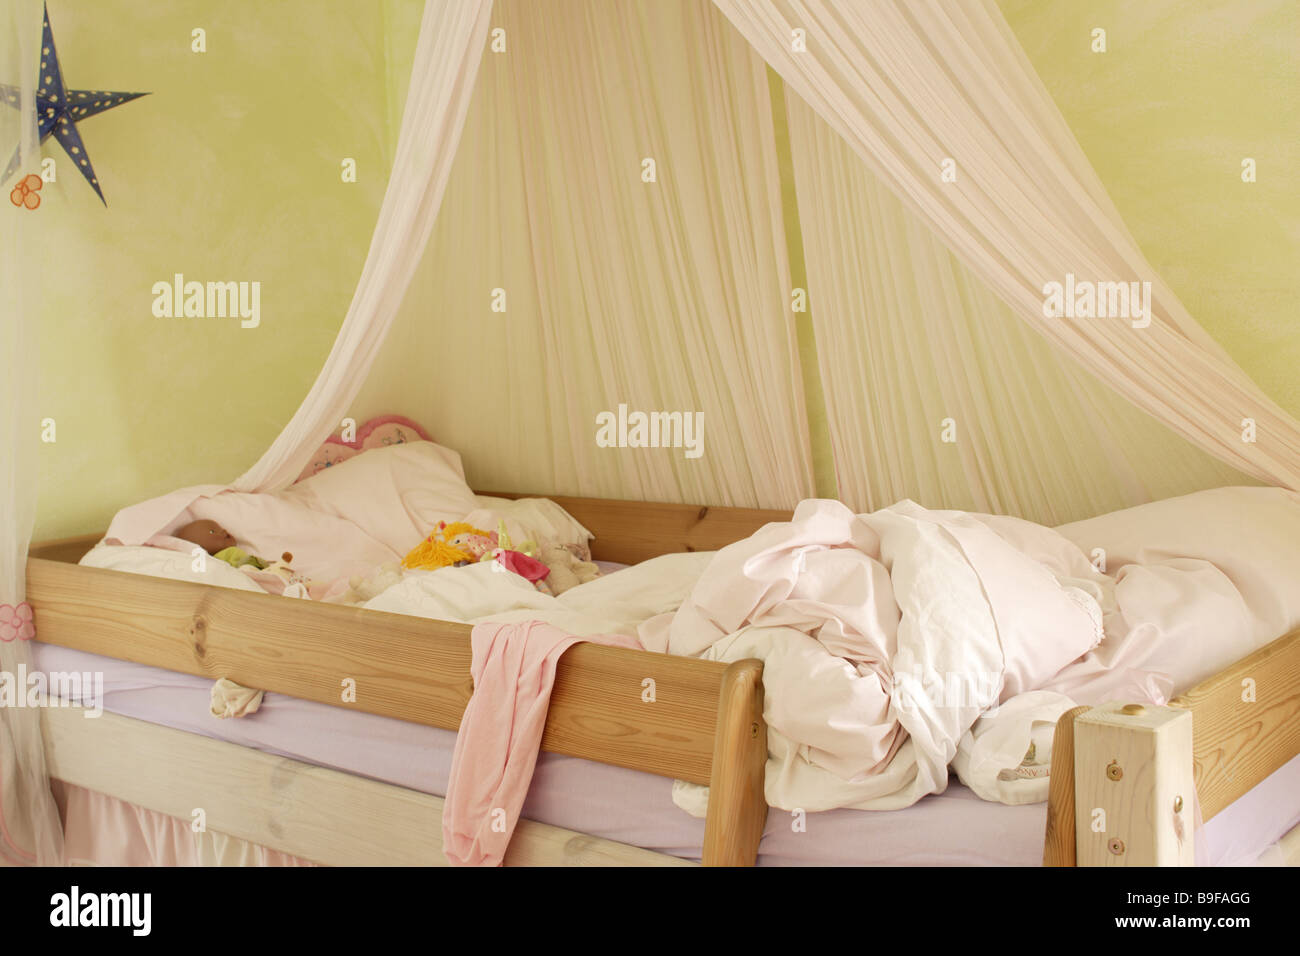 nursery high-bed untidy child's bed stick-bed four-poster bedding carelessly chaos symbol girl-rooms equipment girlish pink Stock Photo